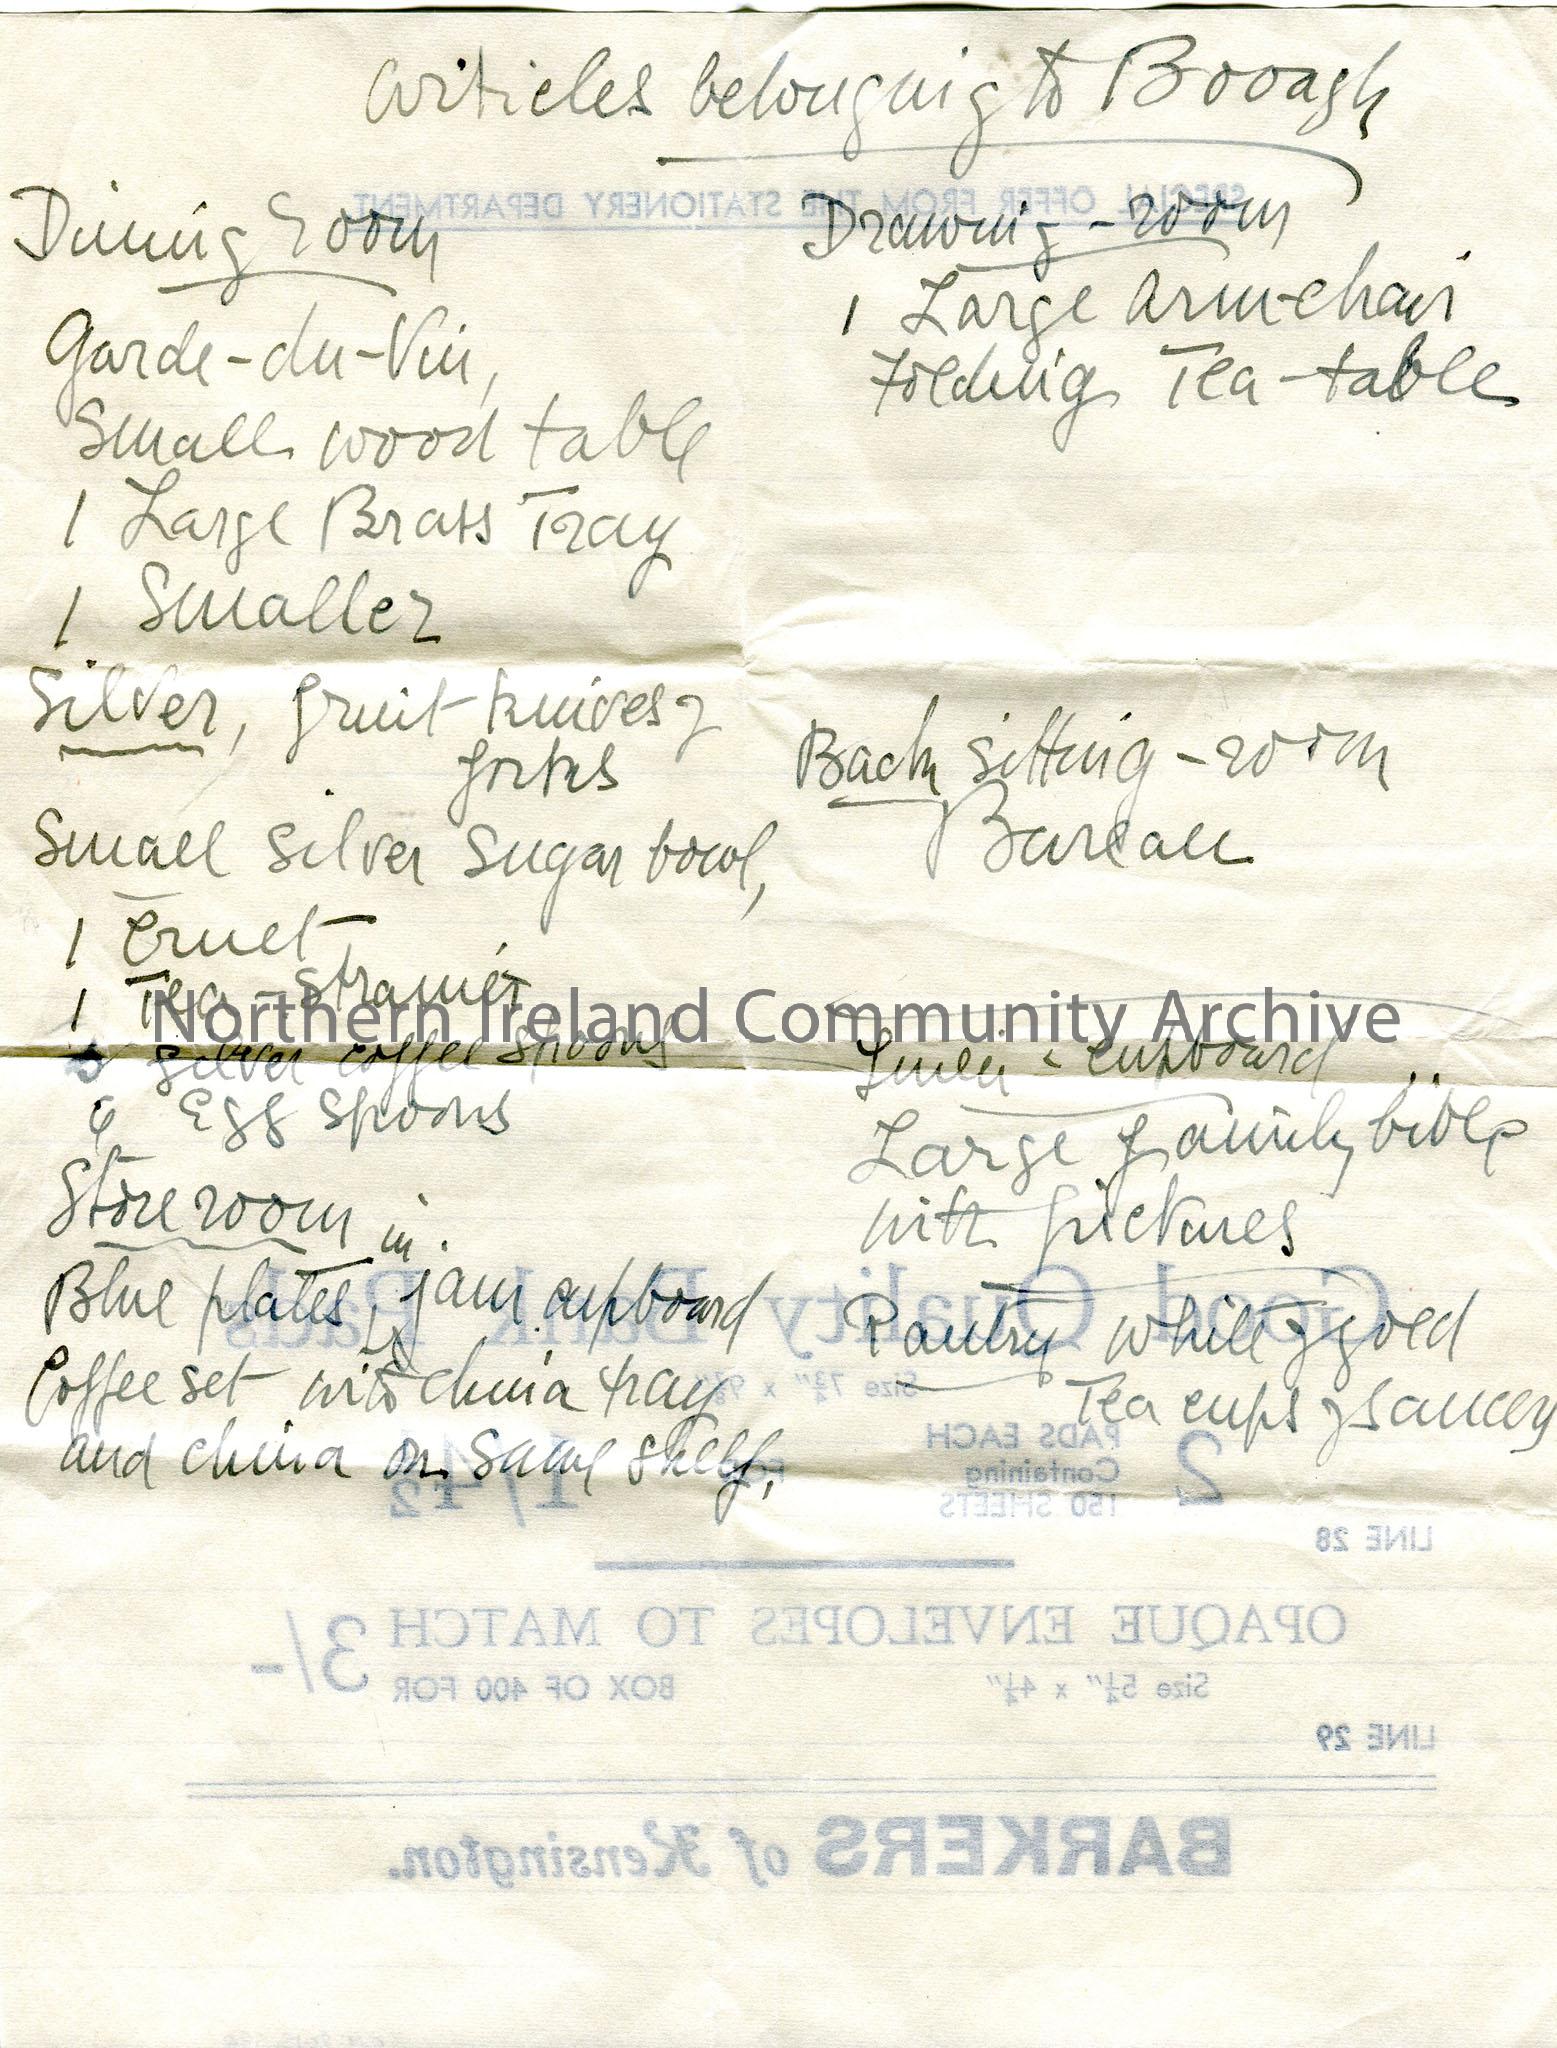 Handwritten list in ink of items ‘articles belonging to Bovagh’, written on reverse of lined page carrying advert for ‘Quality Bank Pads’. Furniture a…